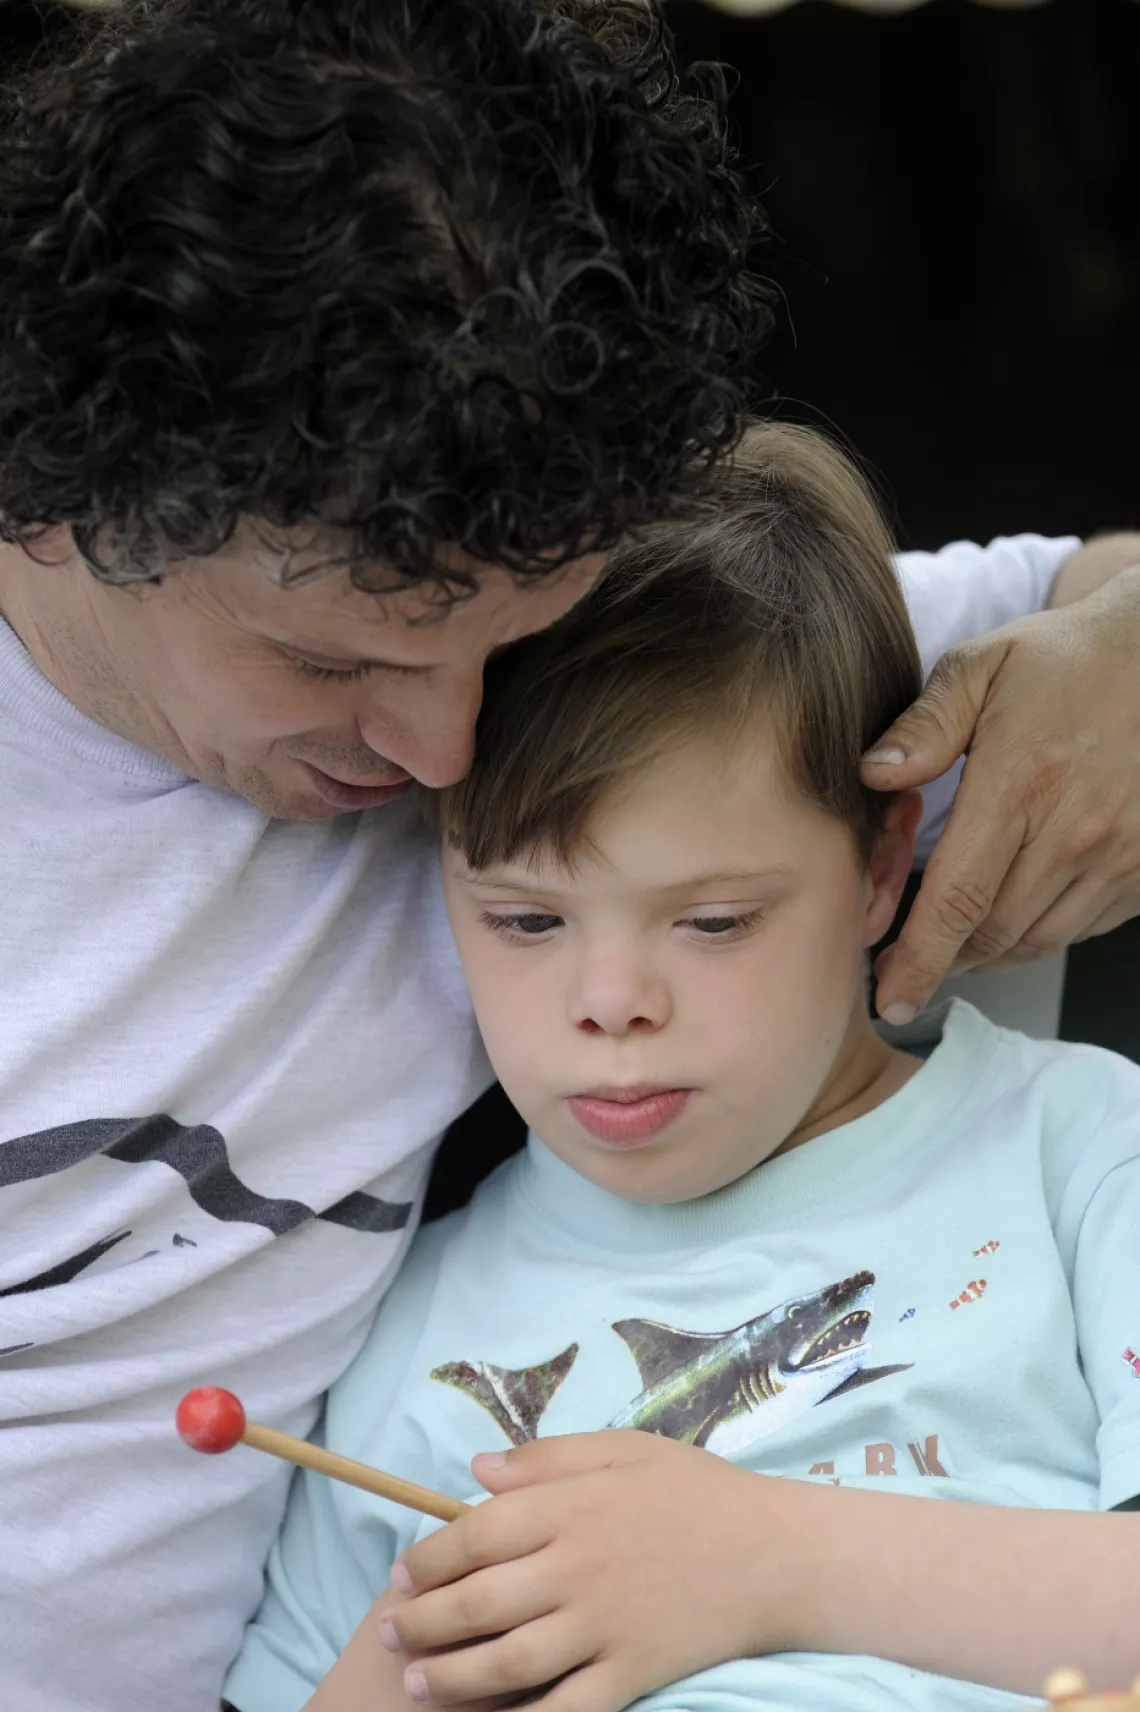 Since joining the family, Ilija’s foster parents say they have seen huge improvements in physical and mental health. 